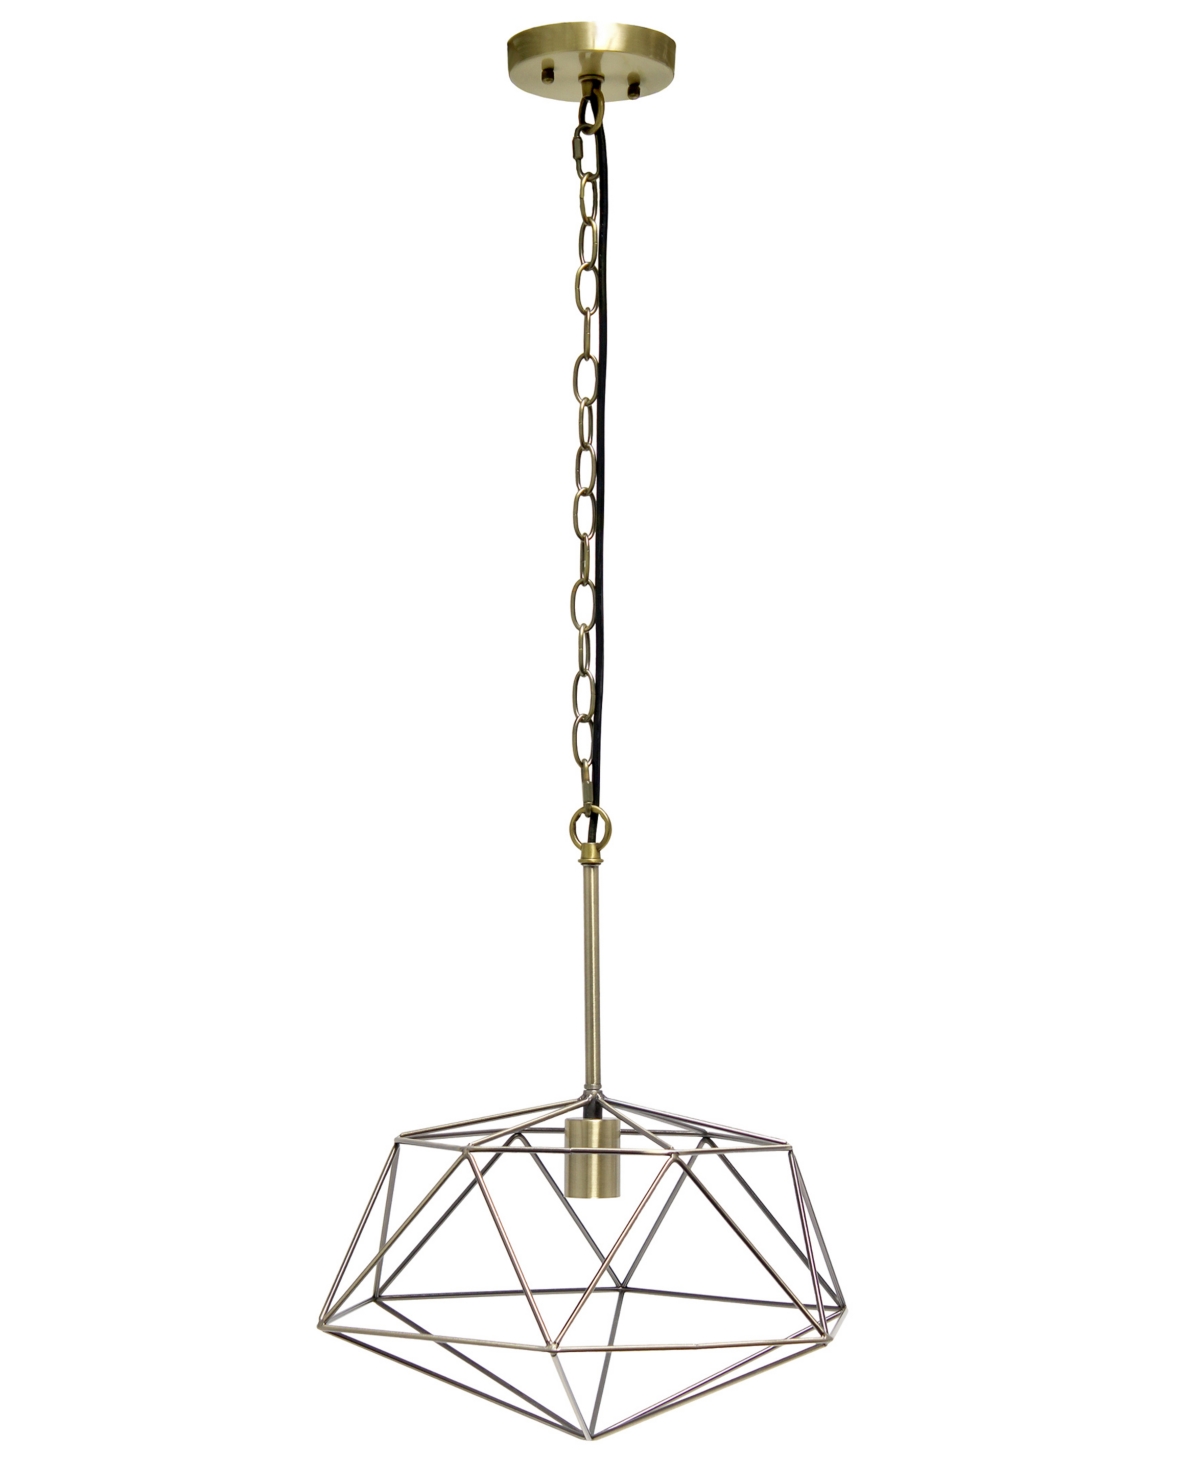 All The Rages 1 Light 16" Modern Metal Wire Paragon Hanging Ceiling Pendant Fixture In Antique Brass